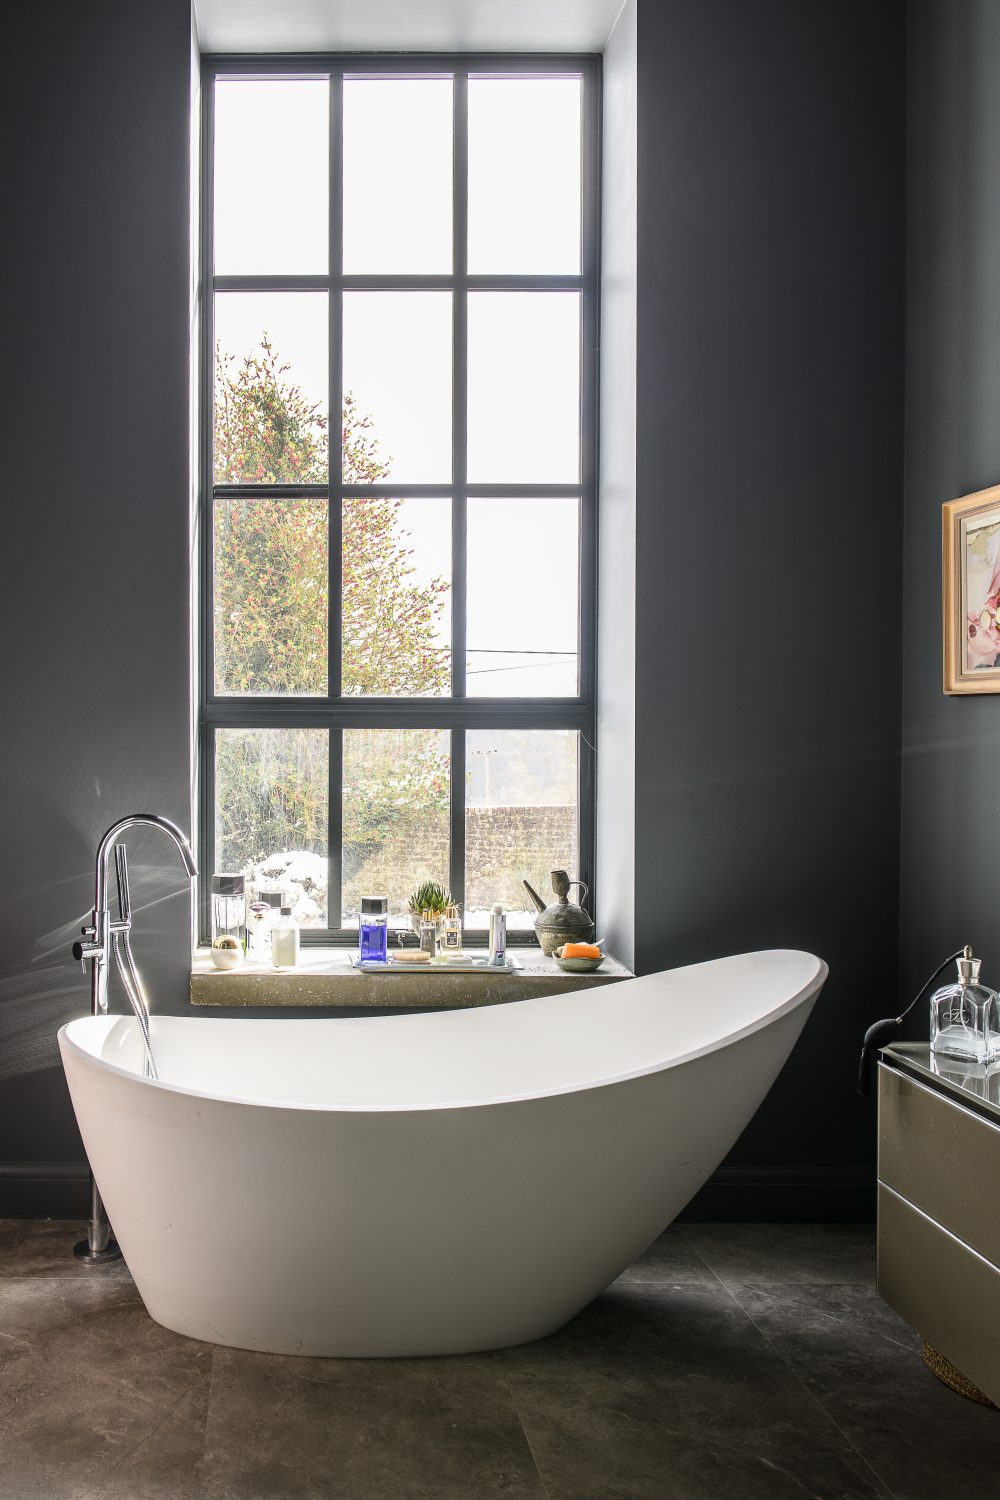 A luxurious, sculptural bath from C P Hart in Tunbridge Wells reclines next to the curtain-less window in the bathroom. The walls are painted in Scree by Little Greene, with wallpaper by Designers Guild